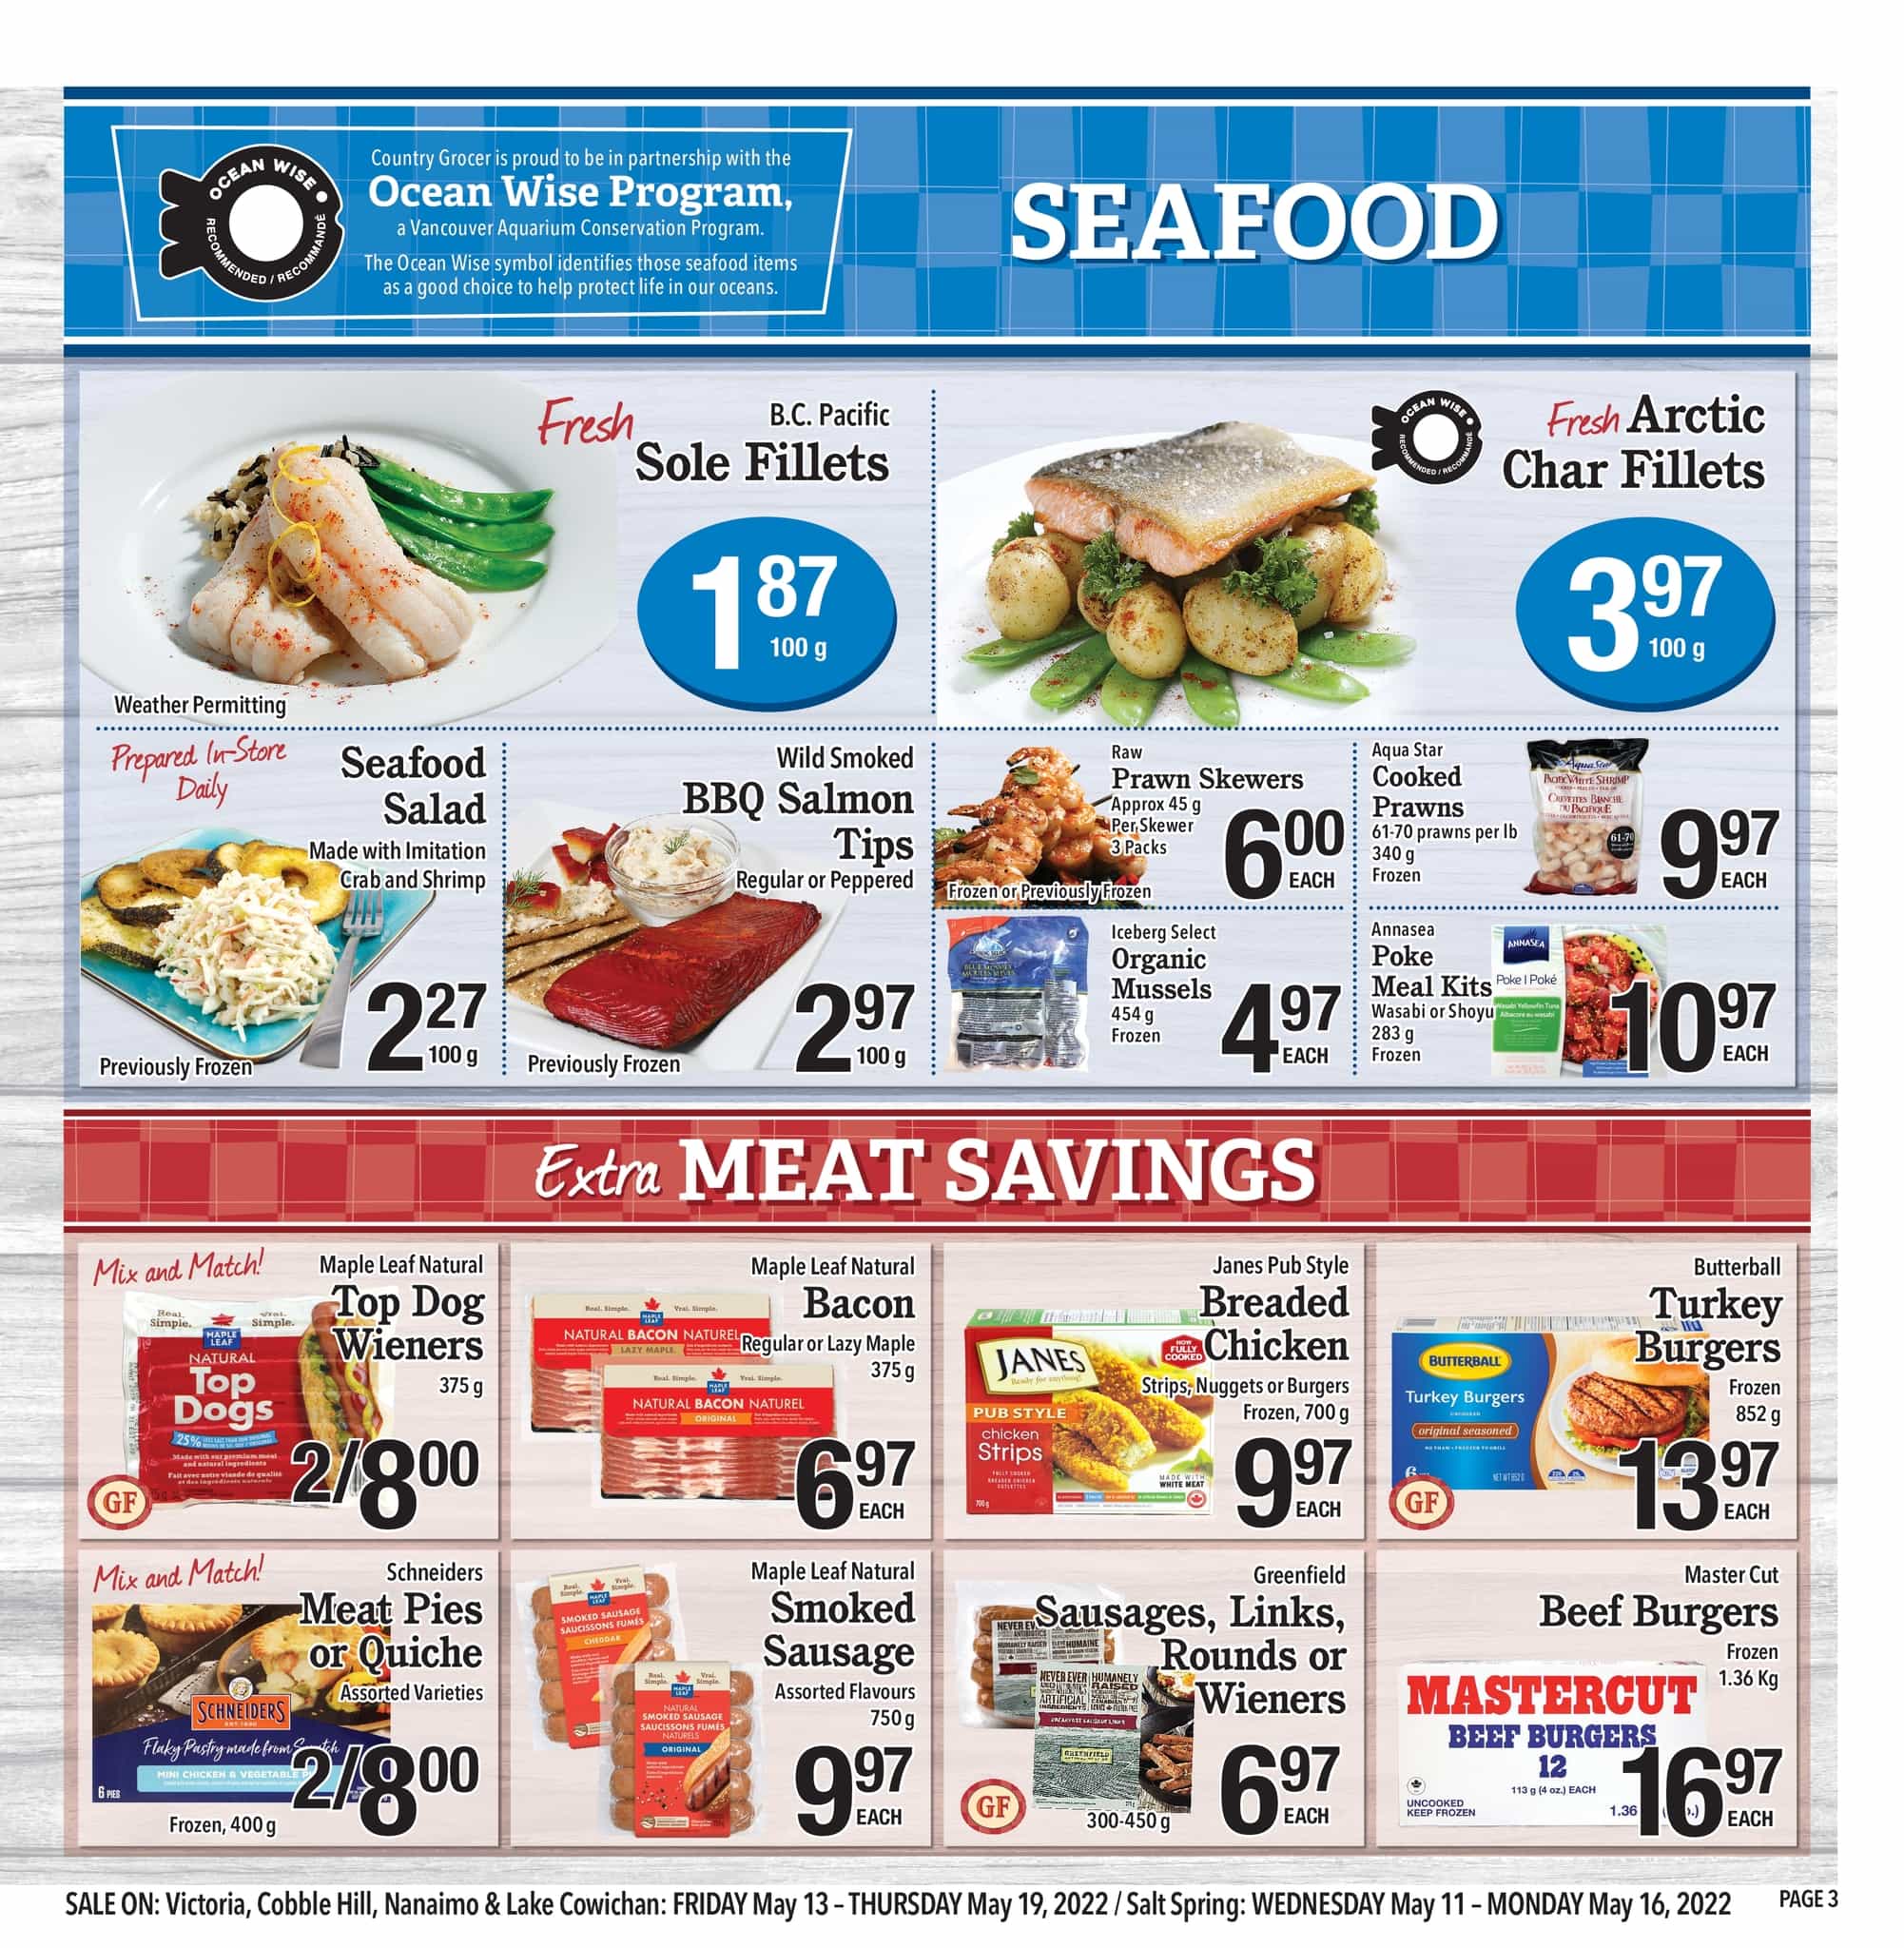 Country Grocer - Weekly Flyer Specials - Page 3